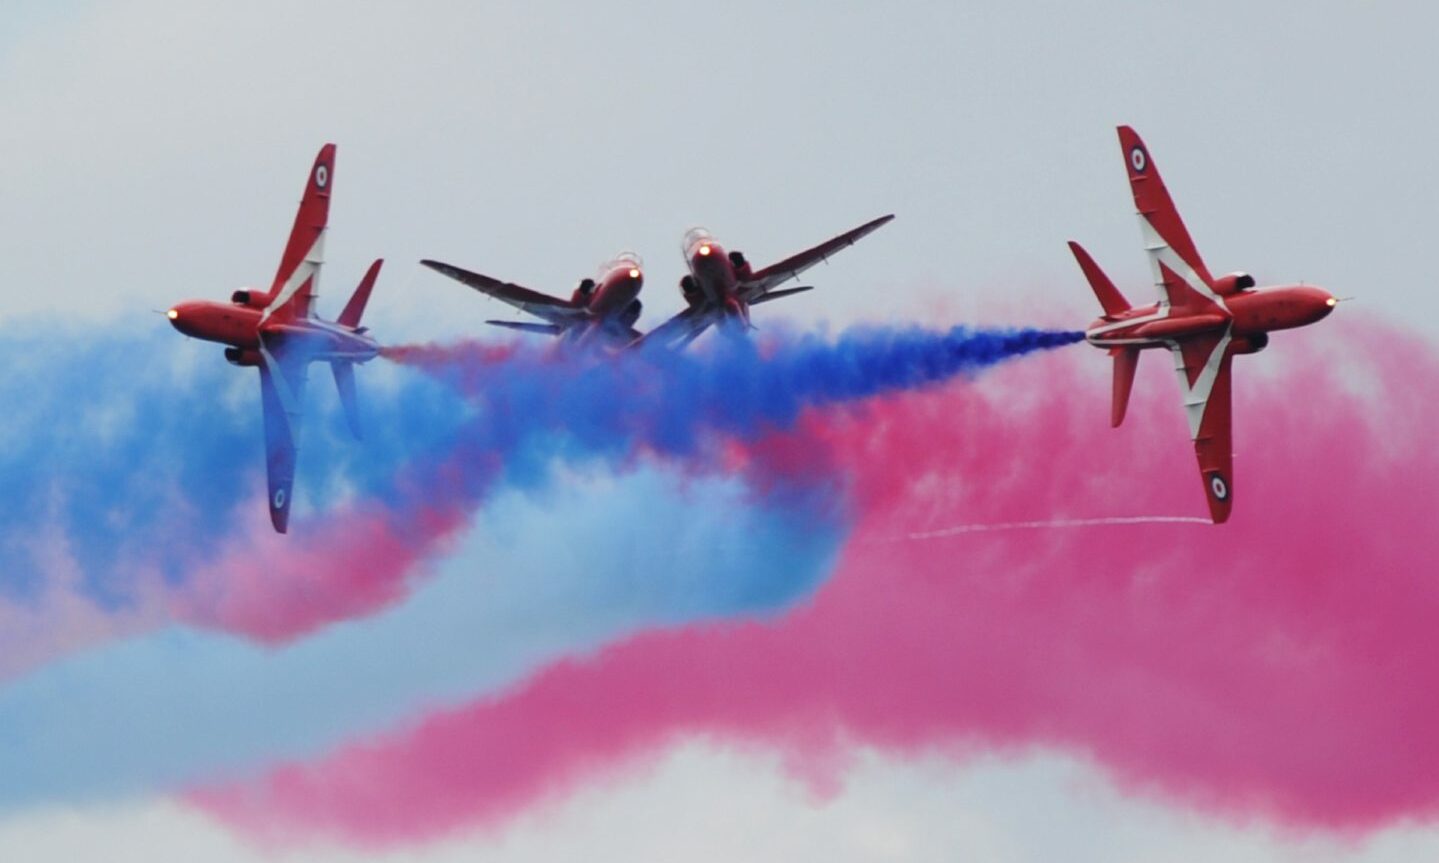 Close up of the Red Arrows performing a stunt.